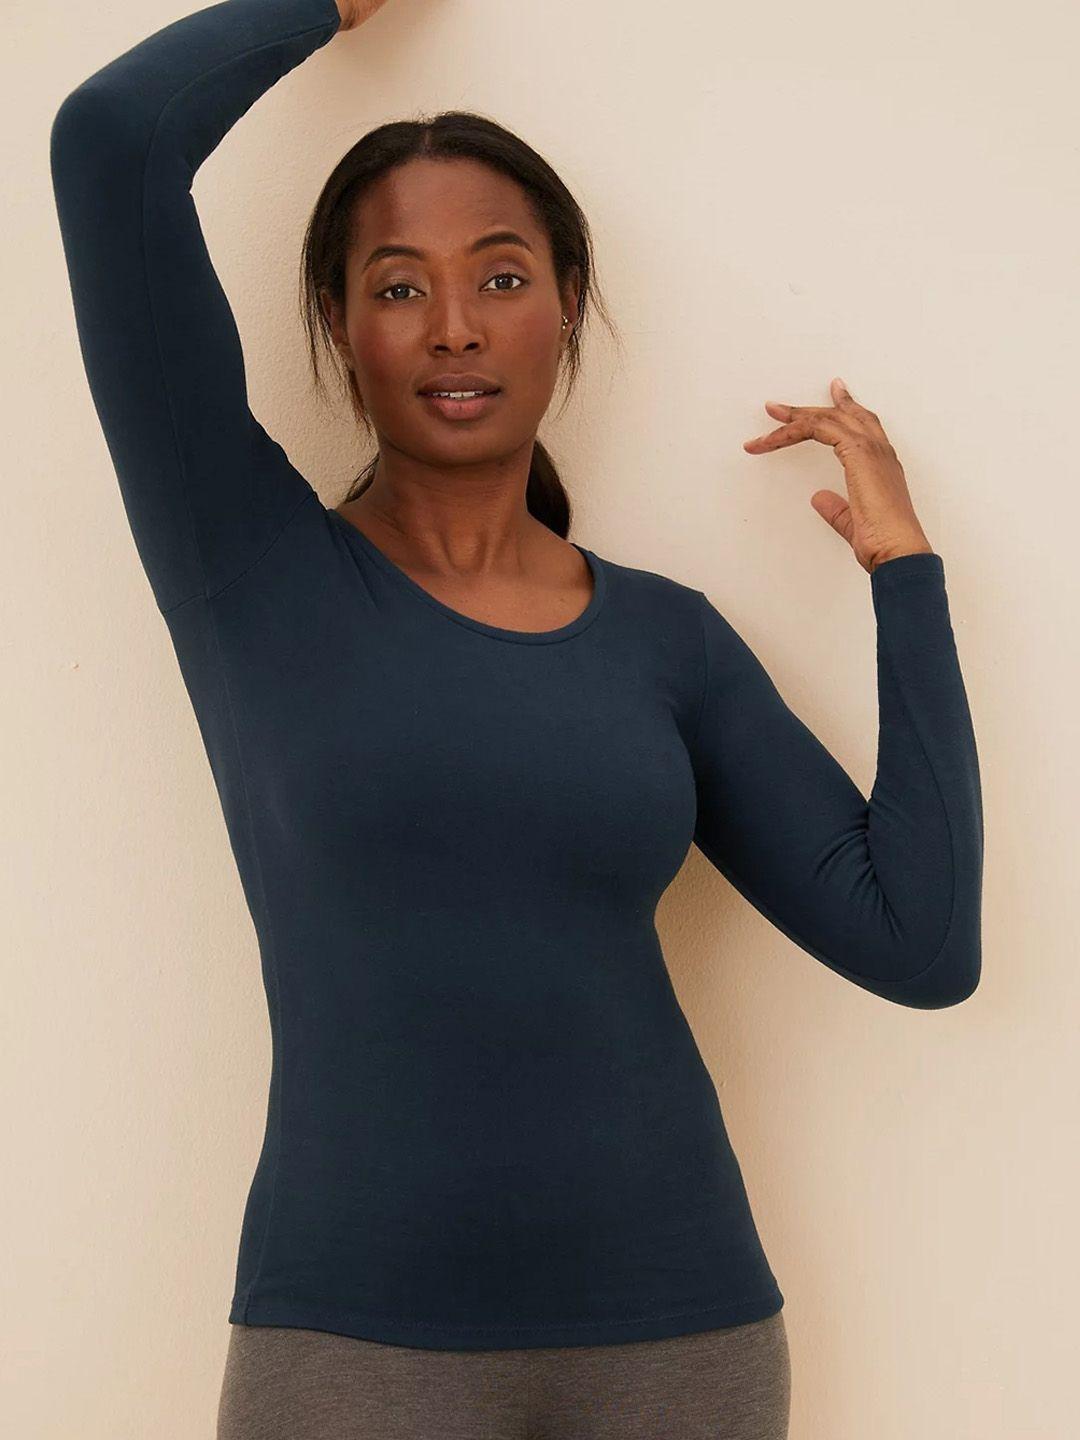 marks & spencer round neck thermal tops